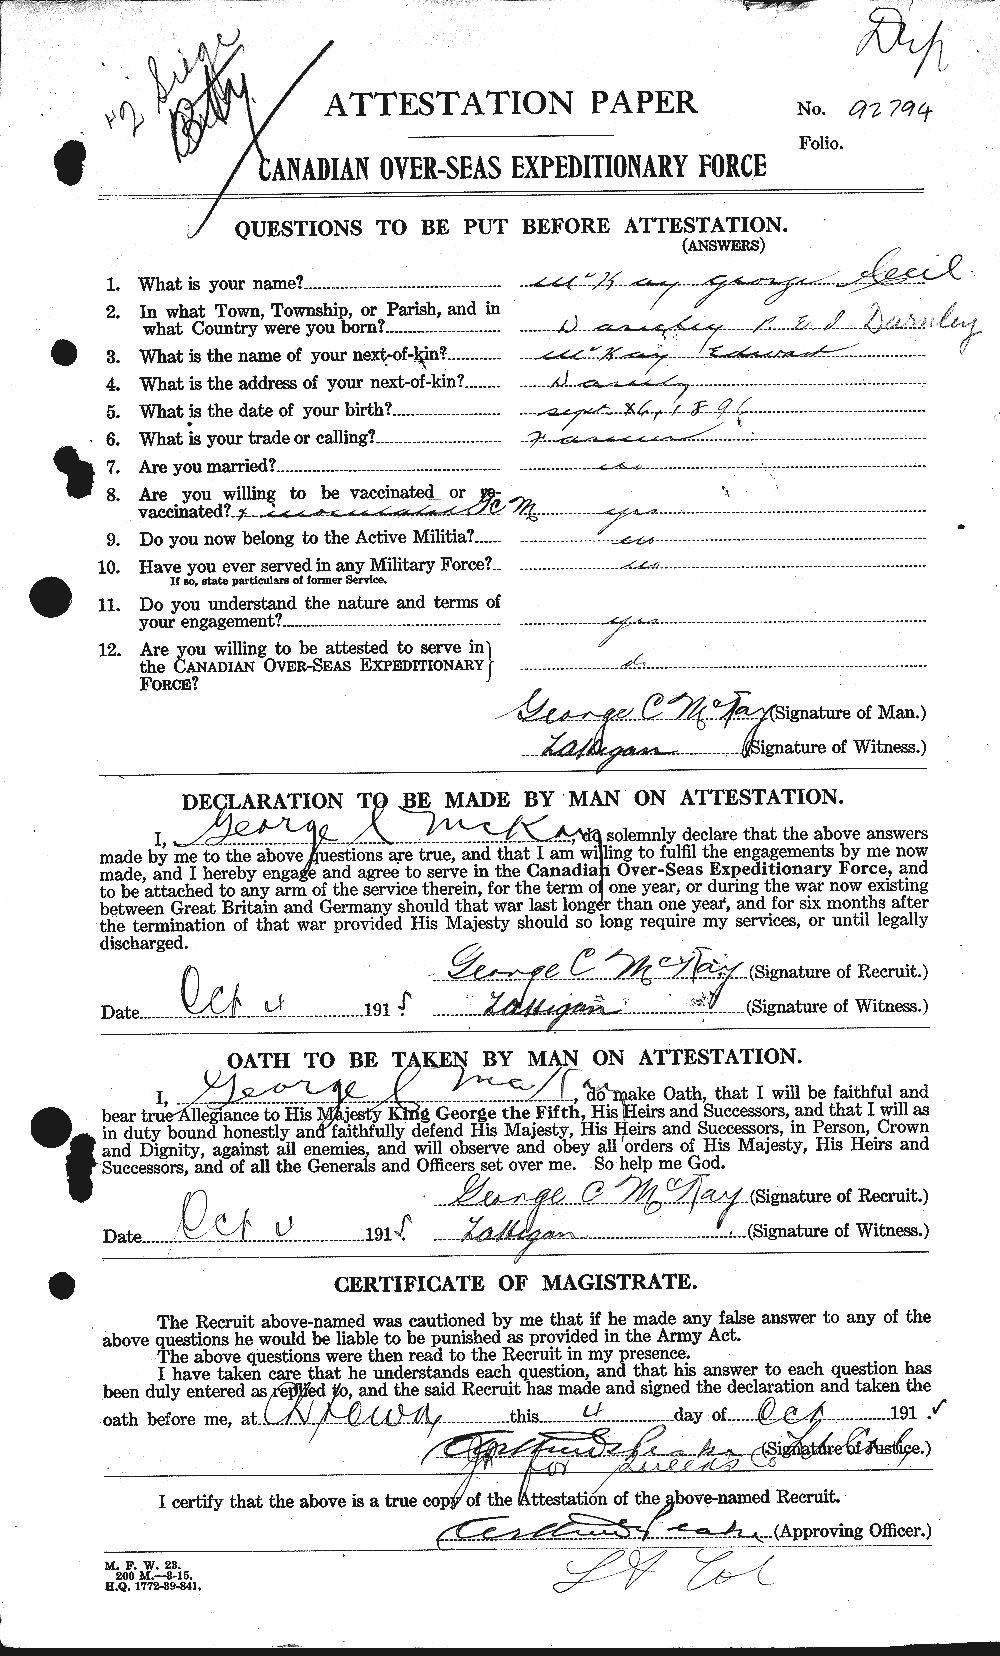 Personnel Records of the First World War - CEF 534667a